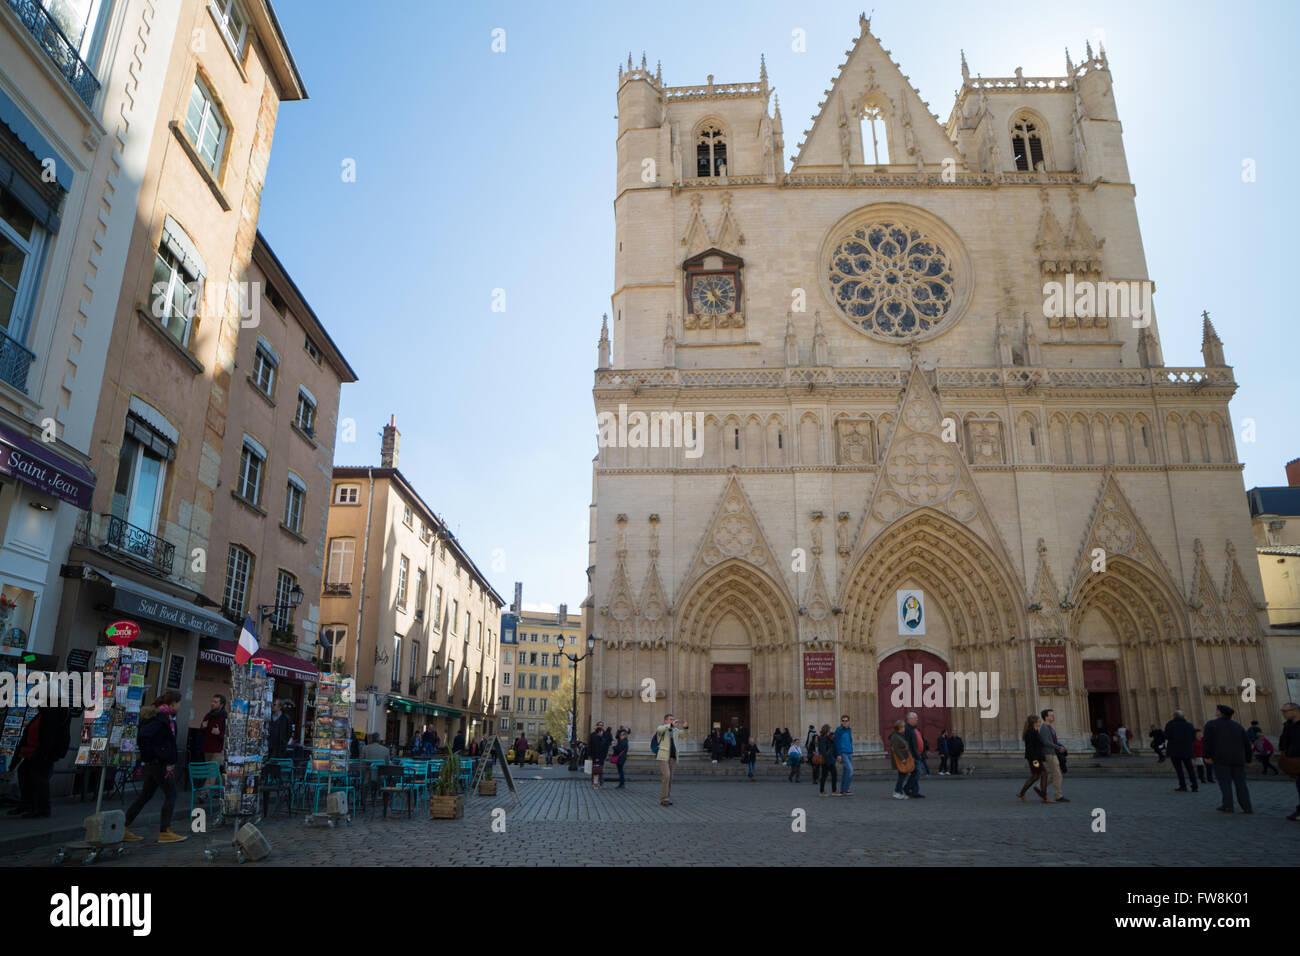 Lyon, France - March 26, 2016: The Saint Jean Cathedral and the Saint Jean square, located in the old town of Lyon. Stock Photo